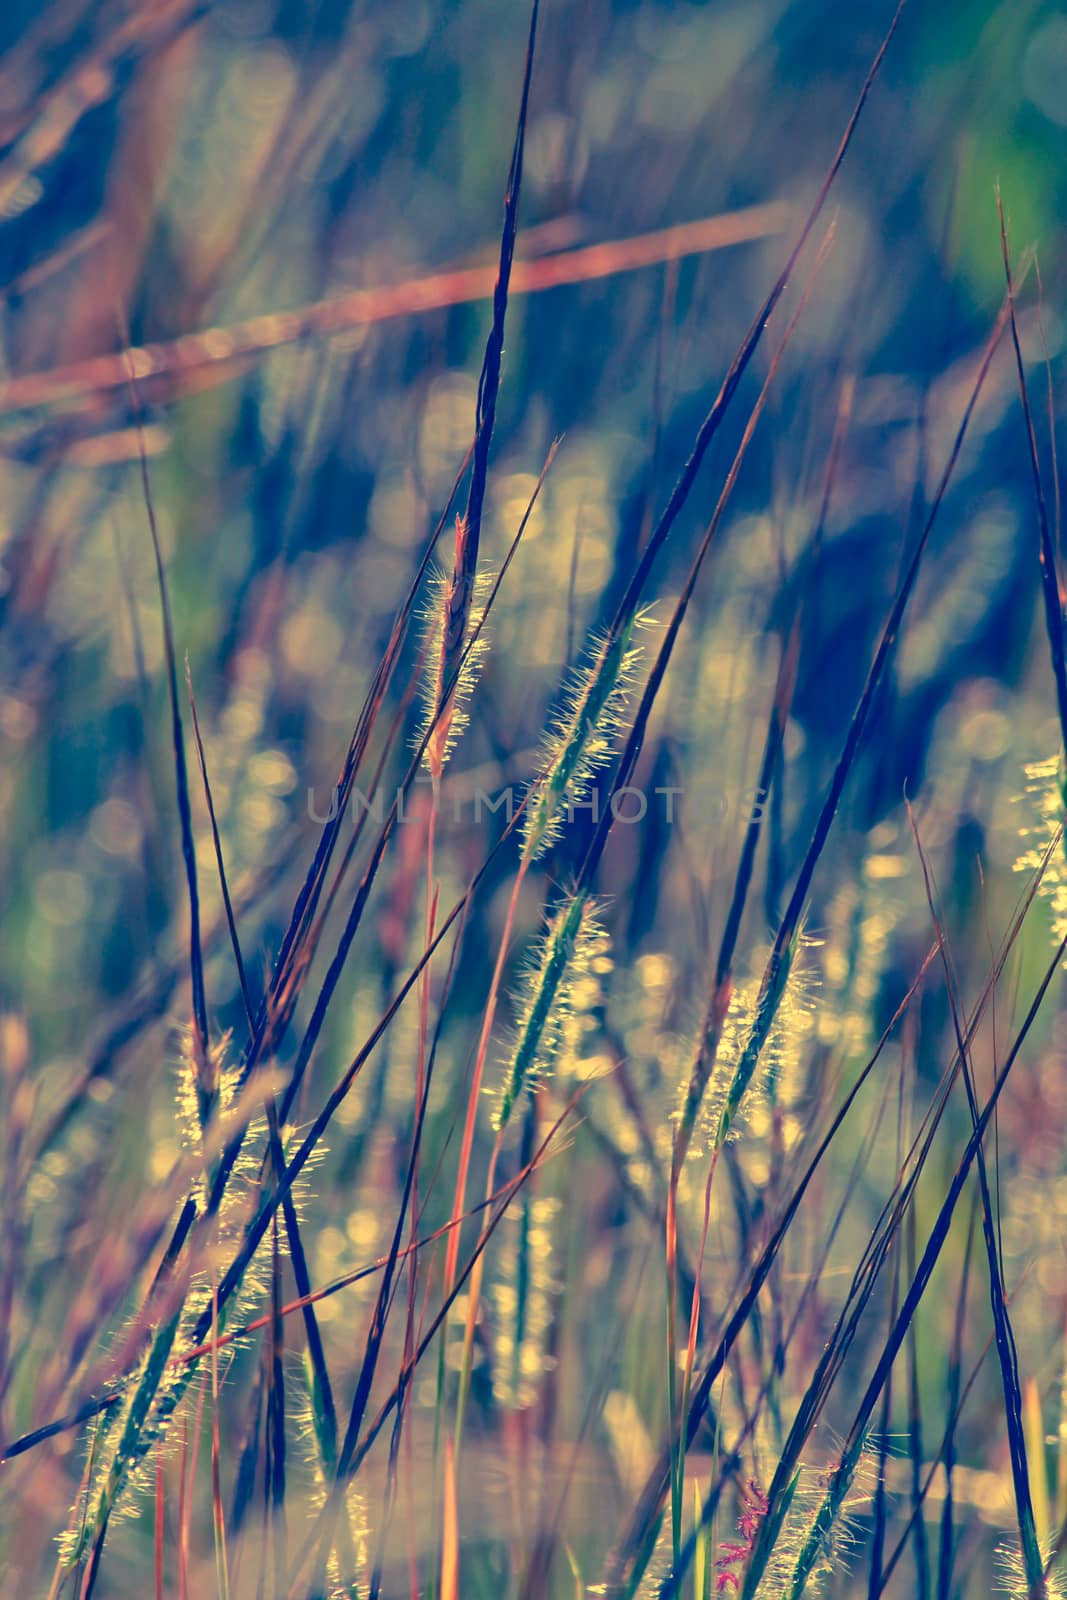 Heteropogon contortus is a tropical, perennial tussock grass. The species is known by many common names, including black speargrass, tanglehead, steekgras and pili.